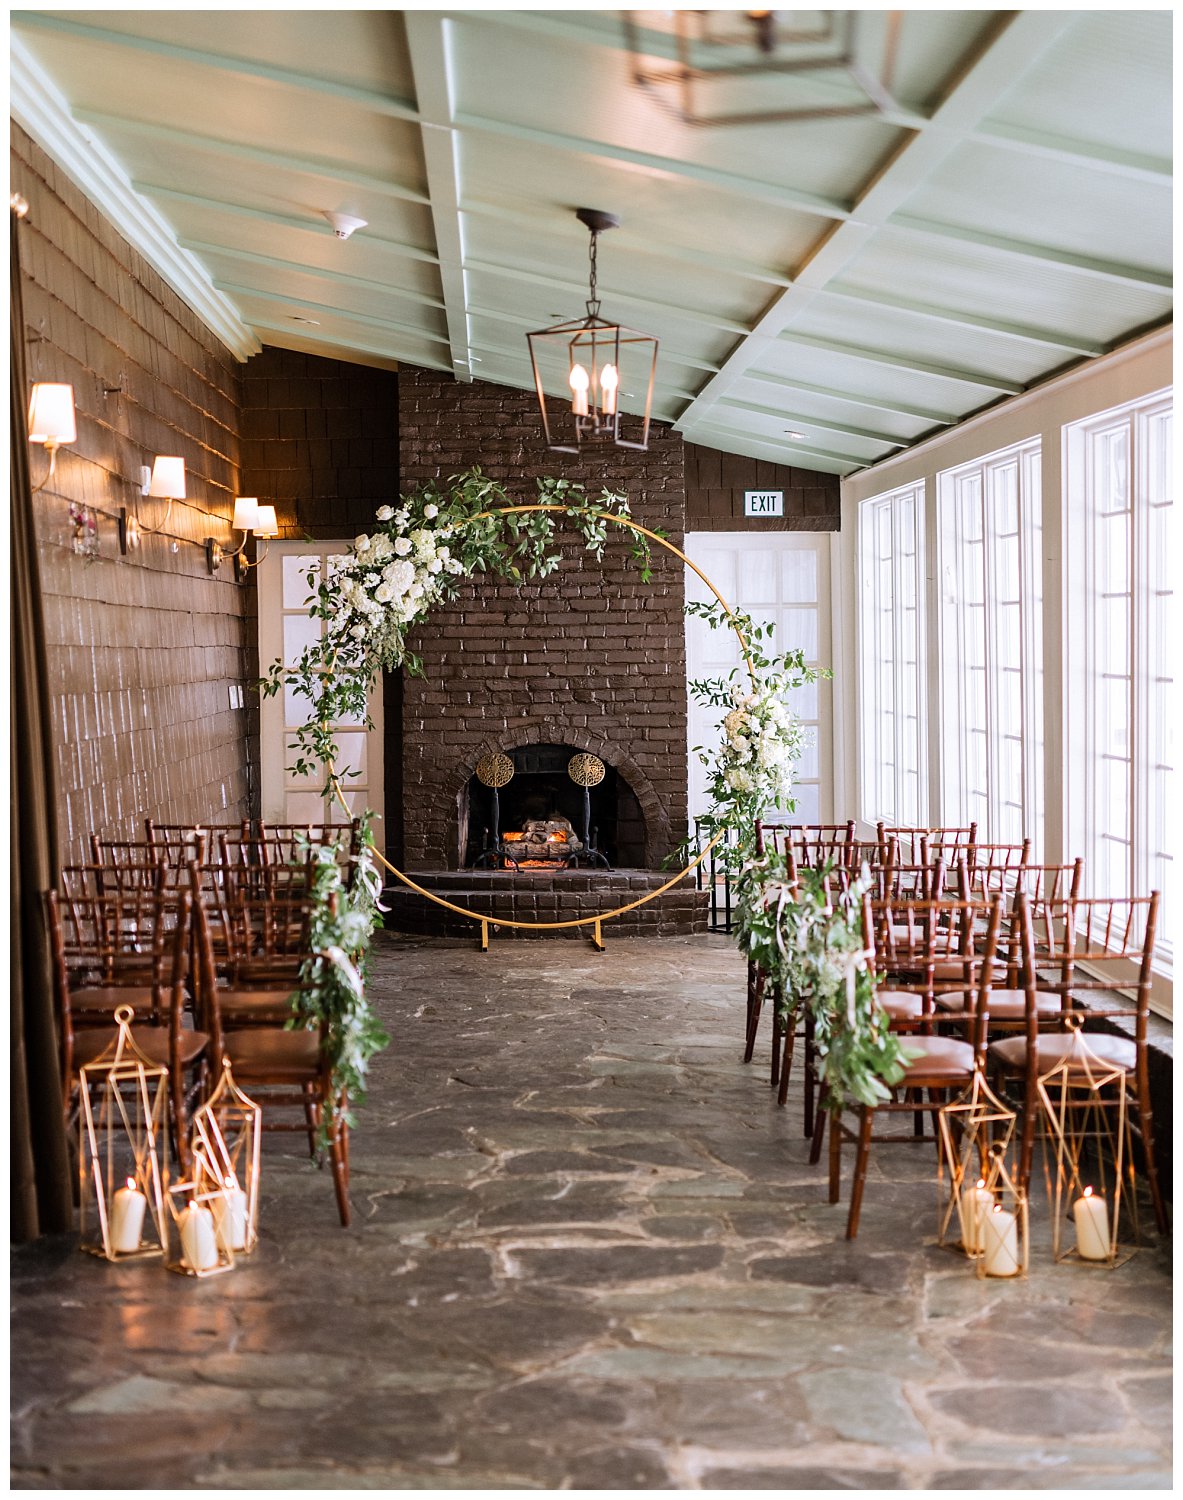 Intimate ceremony at the Clifton Inn in Charlottesville, Virginia